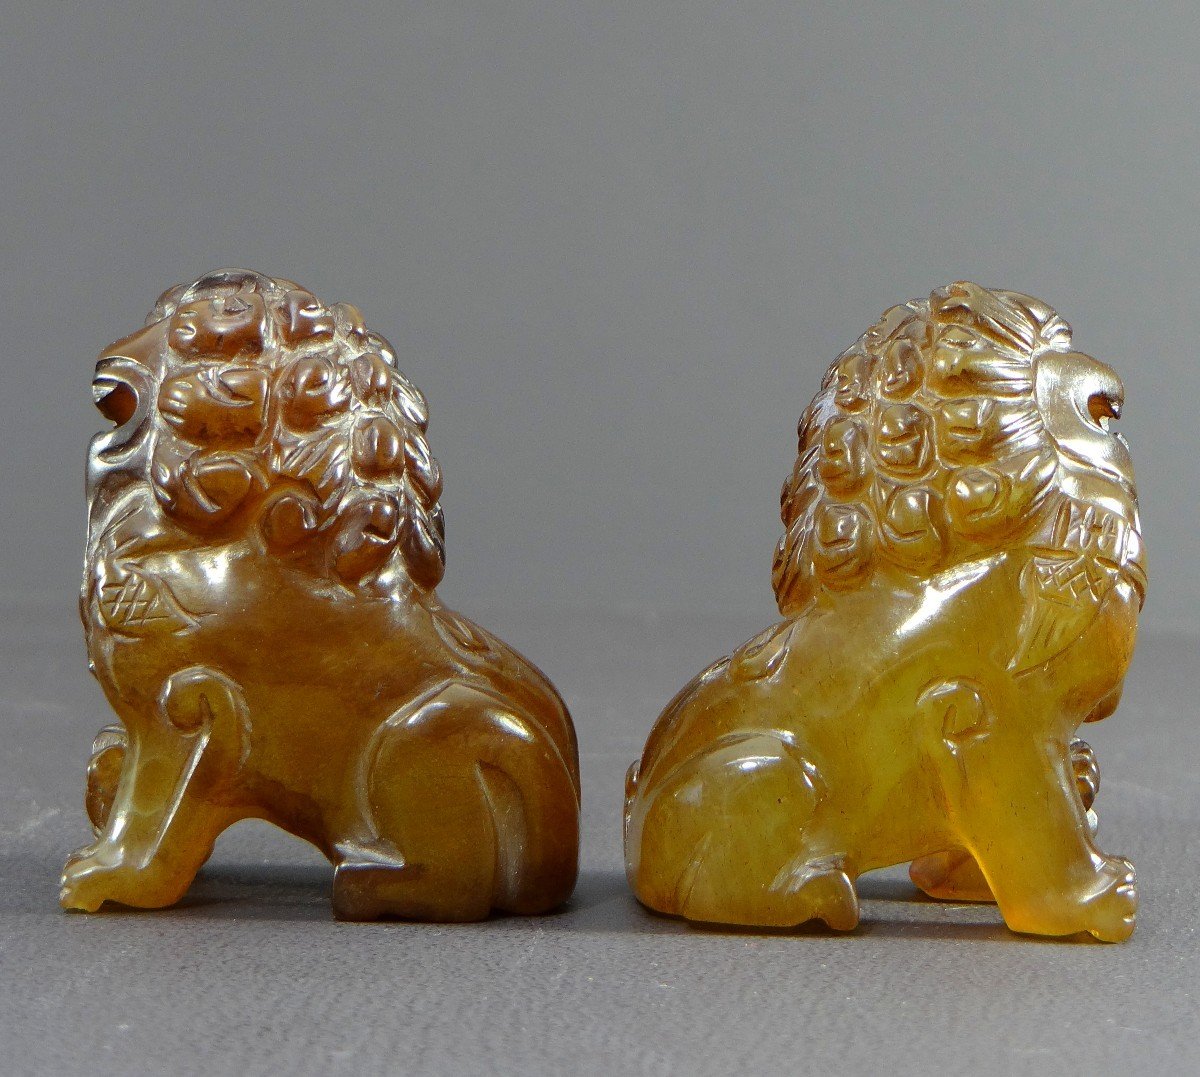 China, Mid-20th Century, Pair Of Fo Dogs In Hard Stone In The Spirit Of Agate.-photo-3